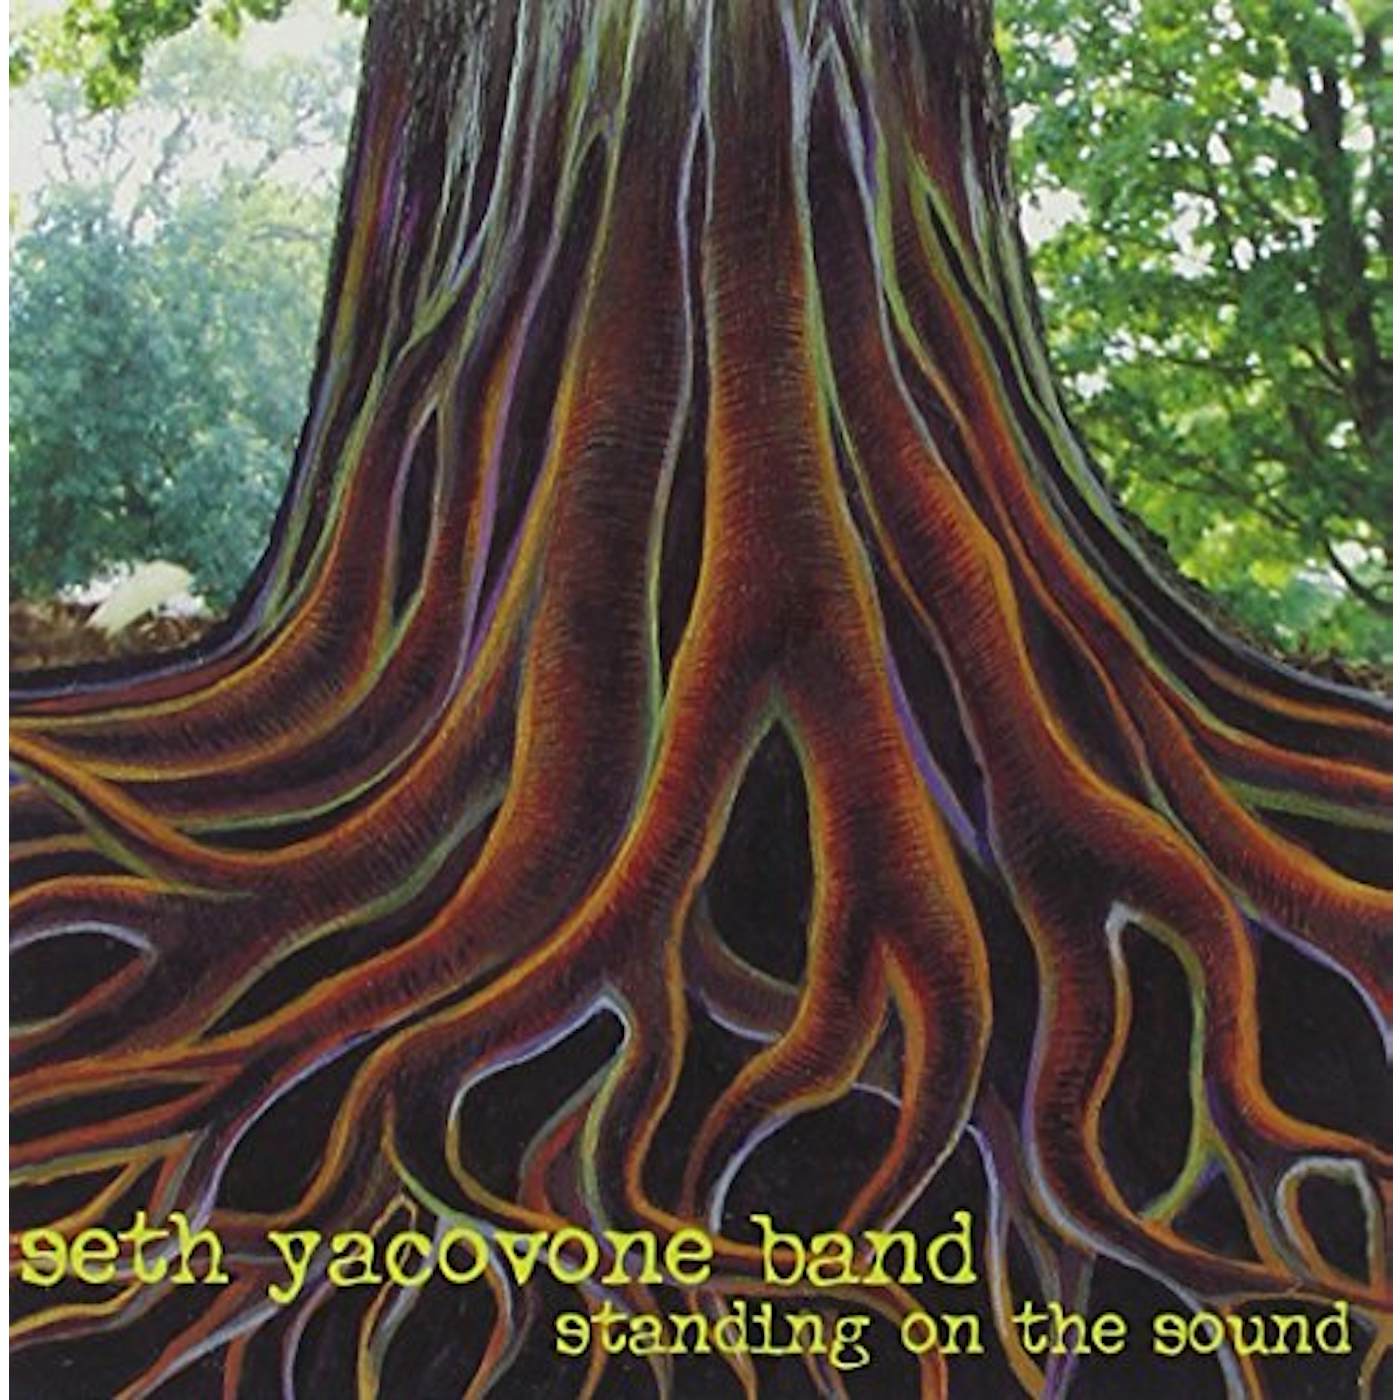 Seth Yacovone Band STANDING ON THE SOUND CD